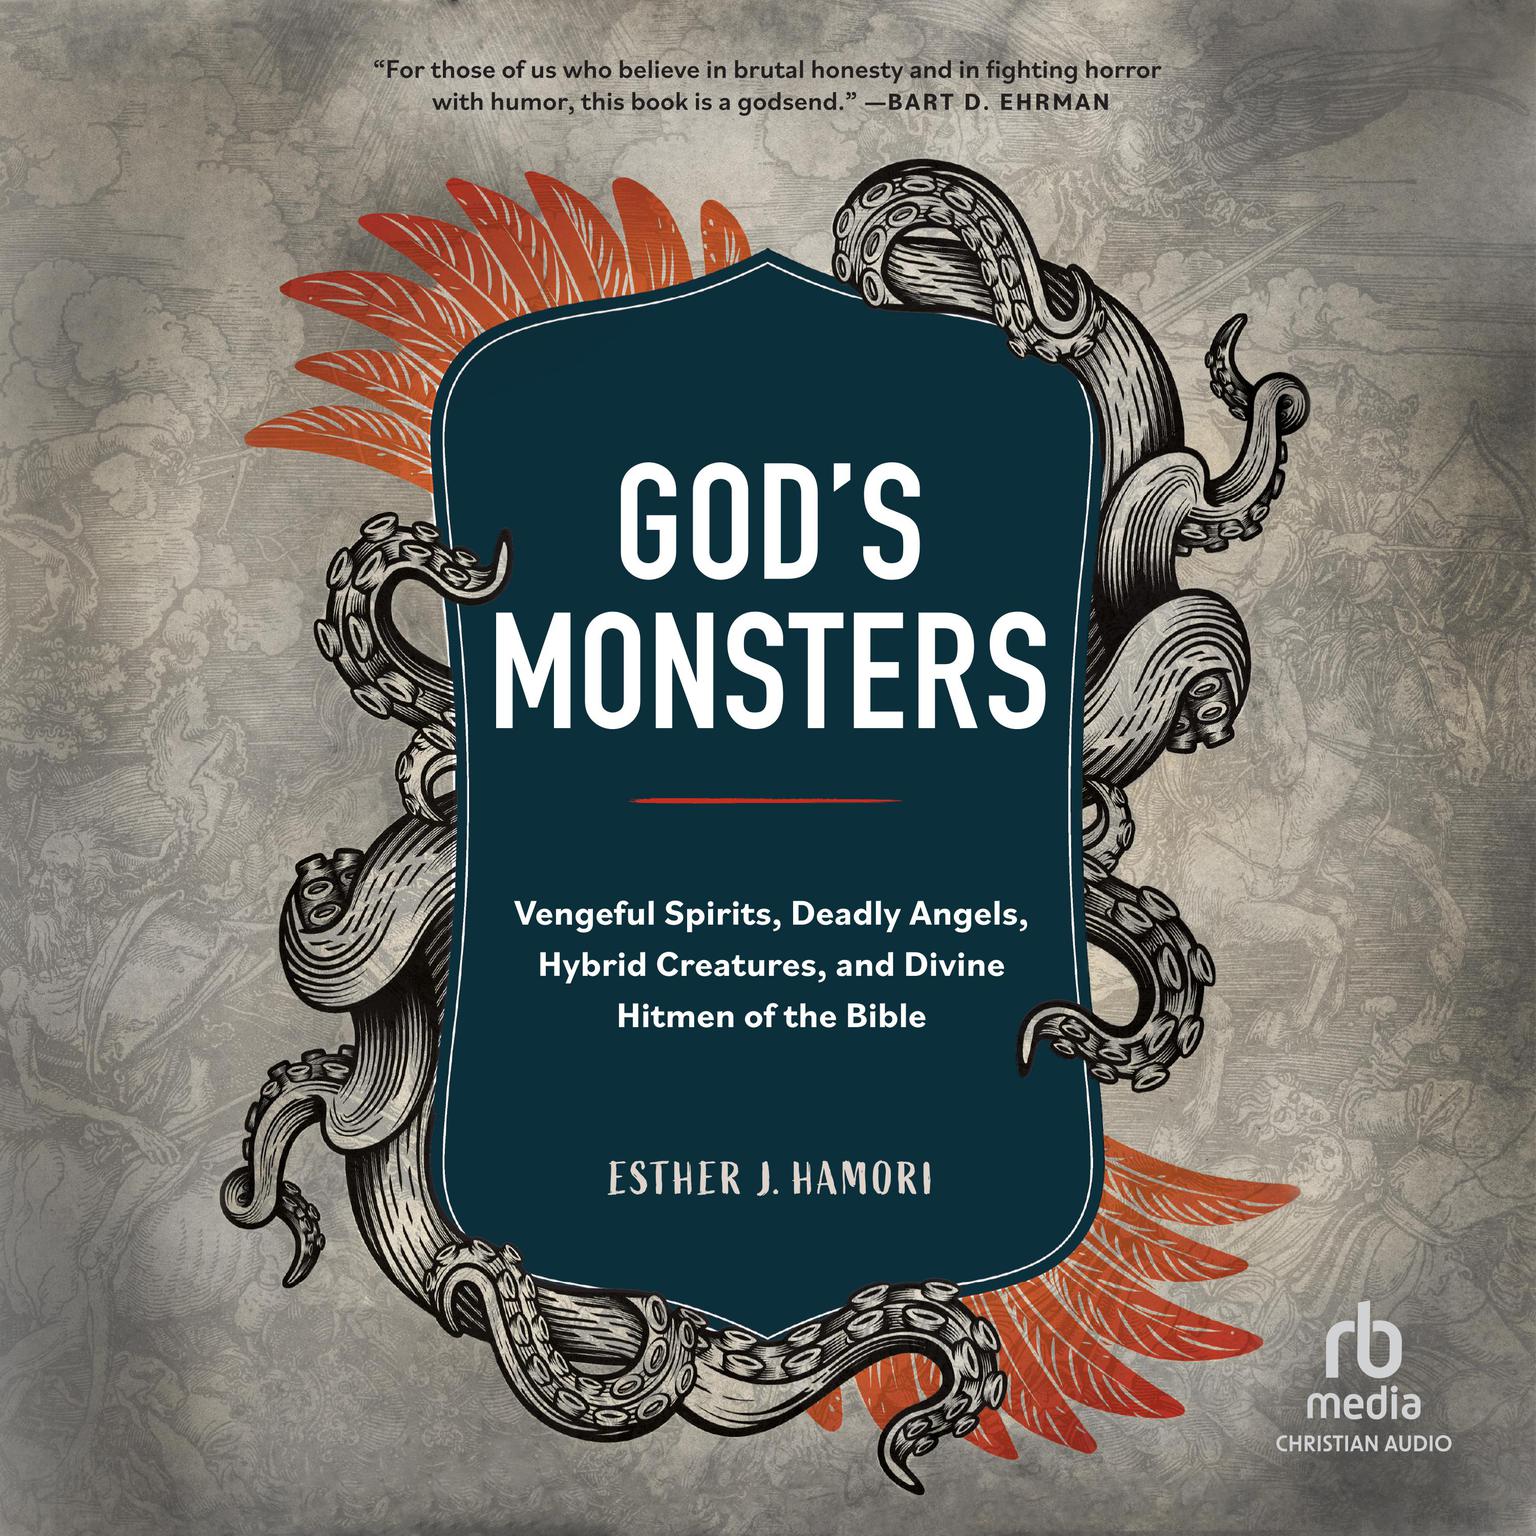 Gods Monsters: Vengeful Spirits, Deadly Angels, Hybrid Creatures, and Divine Hitmen of the Bible Audiobook, by Esther Hamori